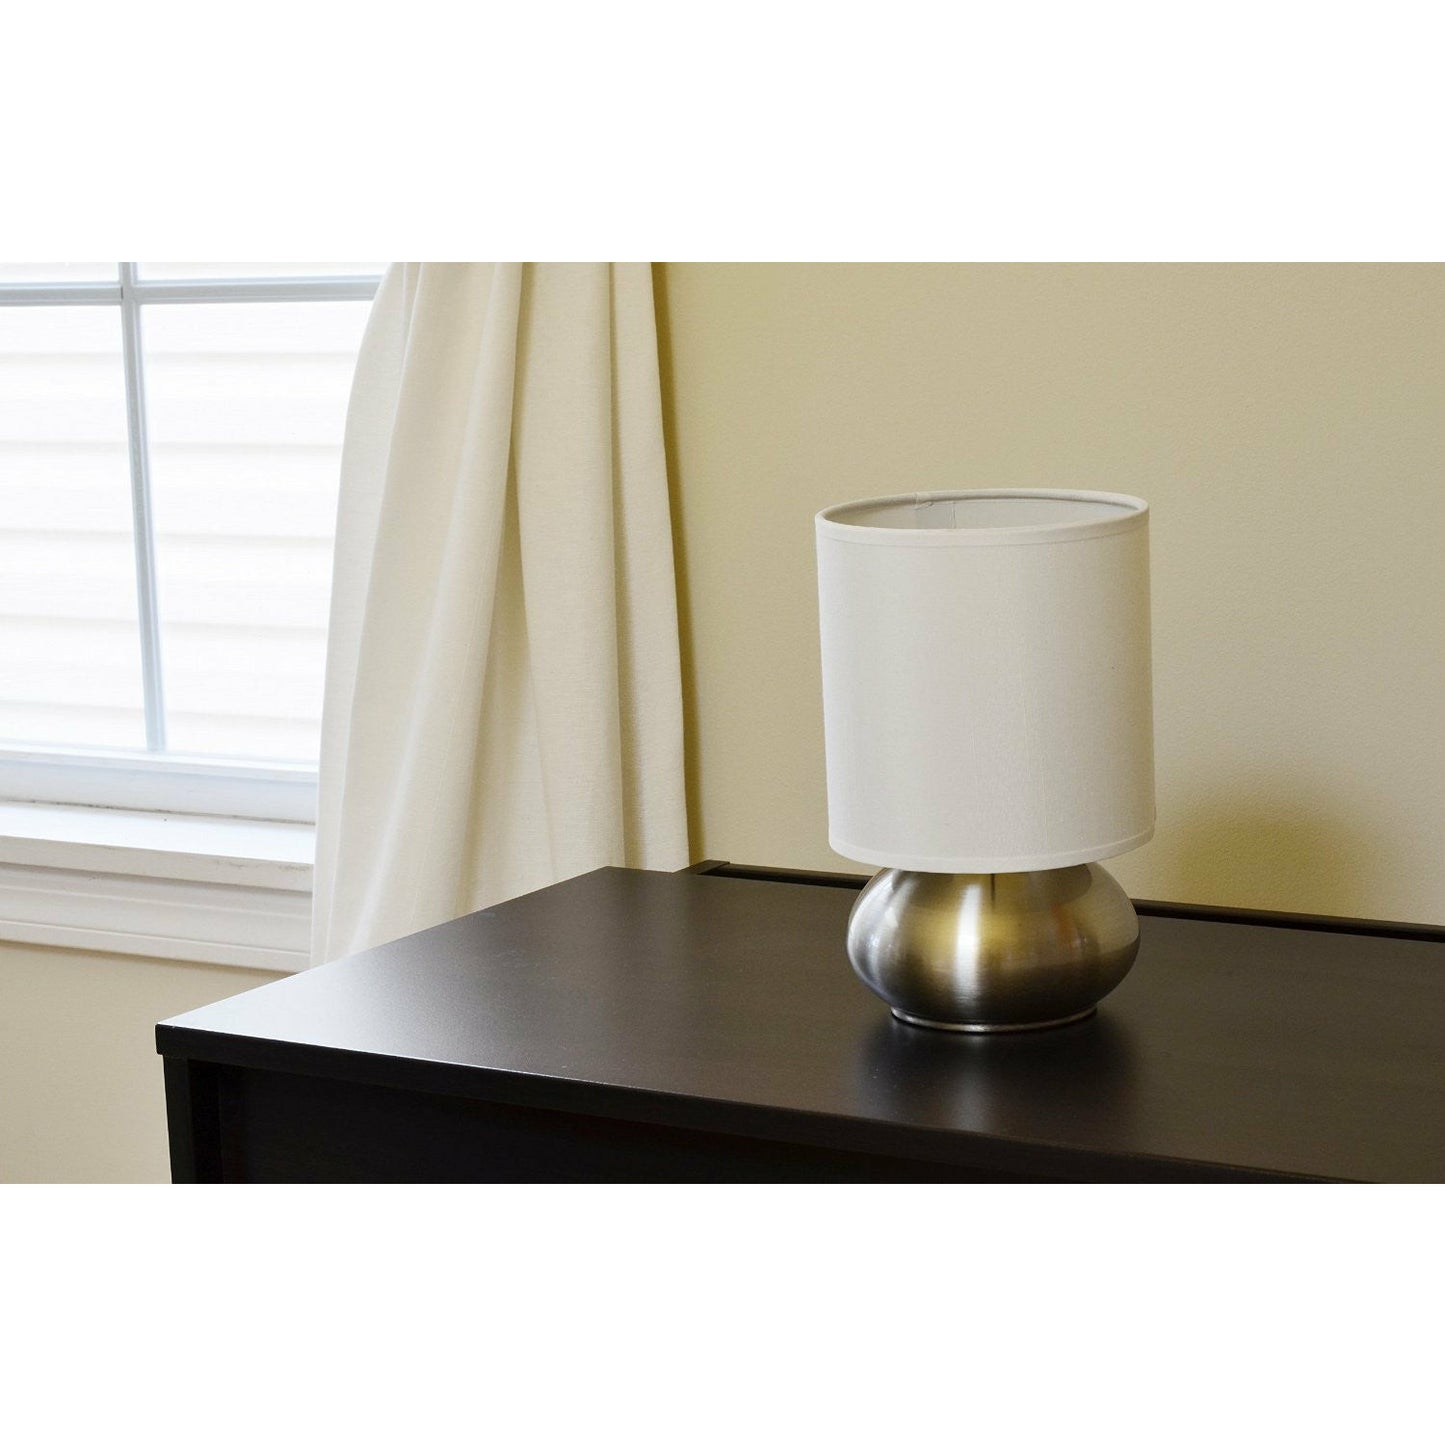 Light Accents Bedroom Side Table Lamps with 3-way Switch Brushed Nickel (Set of 2) - LightAccents.com
 - 4